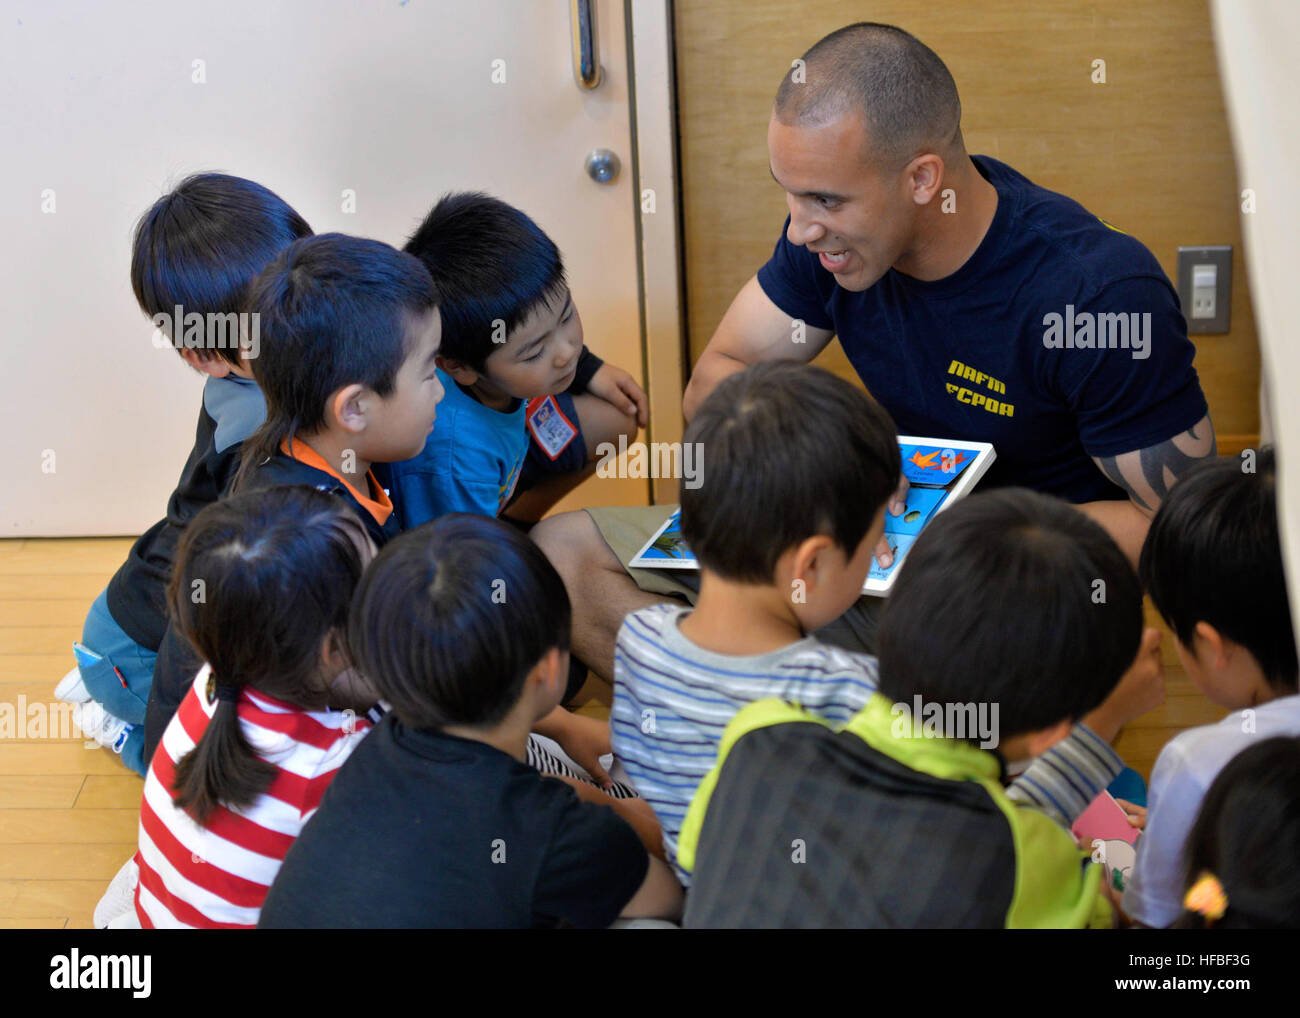 160627-N-OK605-010 MISAWA, Japan (June 27, 2016) Information Sytems Technician 1st Class Ryan McNair, attached to Naval Air Facility Misawa (NAFM), from Gulfport, Miss., practices english with the children at the Ohzora Jido-Kan, a Japanese after school care center. Sailors from NAFM volunteer to make bi-weekly visits to the after school care center as part of community relations efforts. (U.S. Navy Photo by Mass Communication Speciliast 2nd Class Samuel Weldin/Released) 160627-N-OK605-010 160627-N-OK605-010 Stock Photo